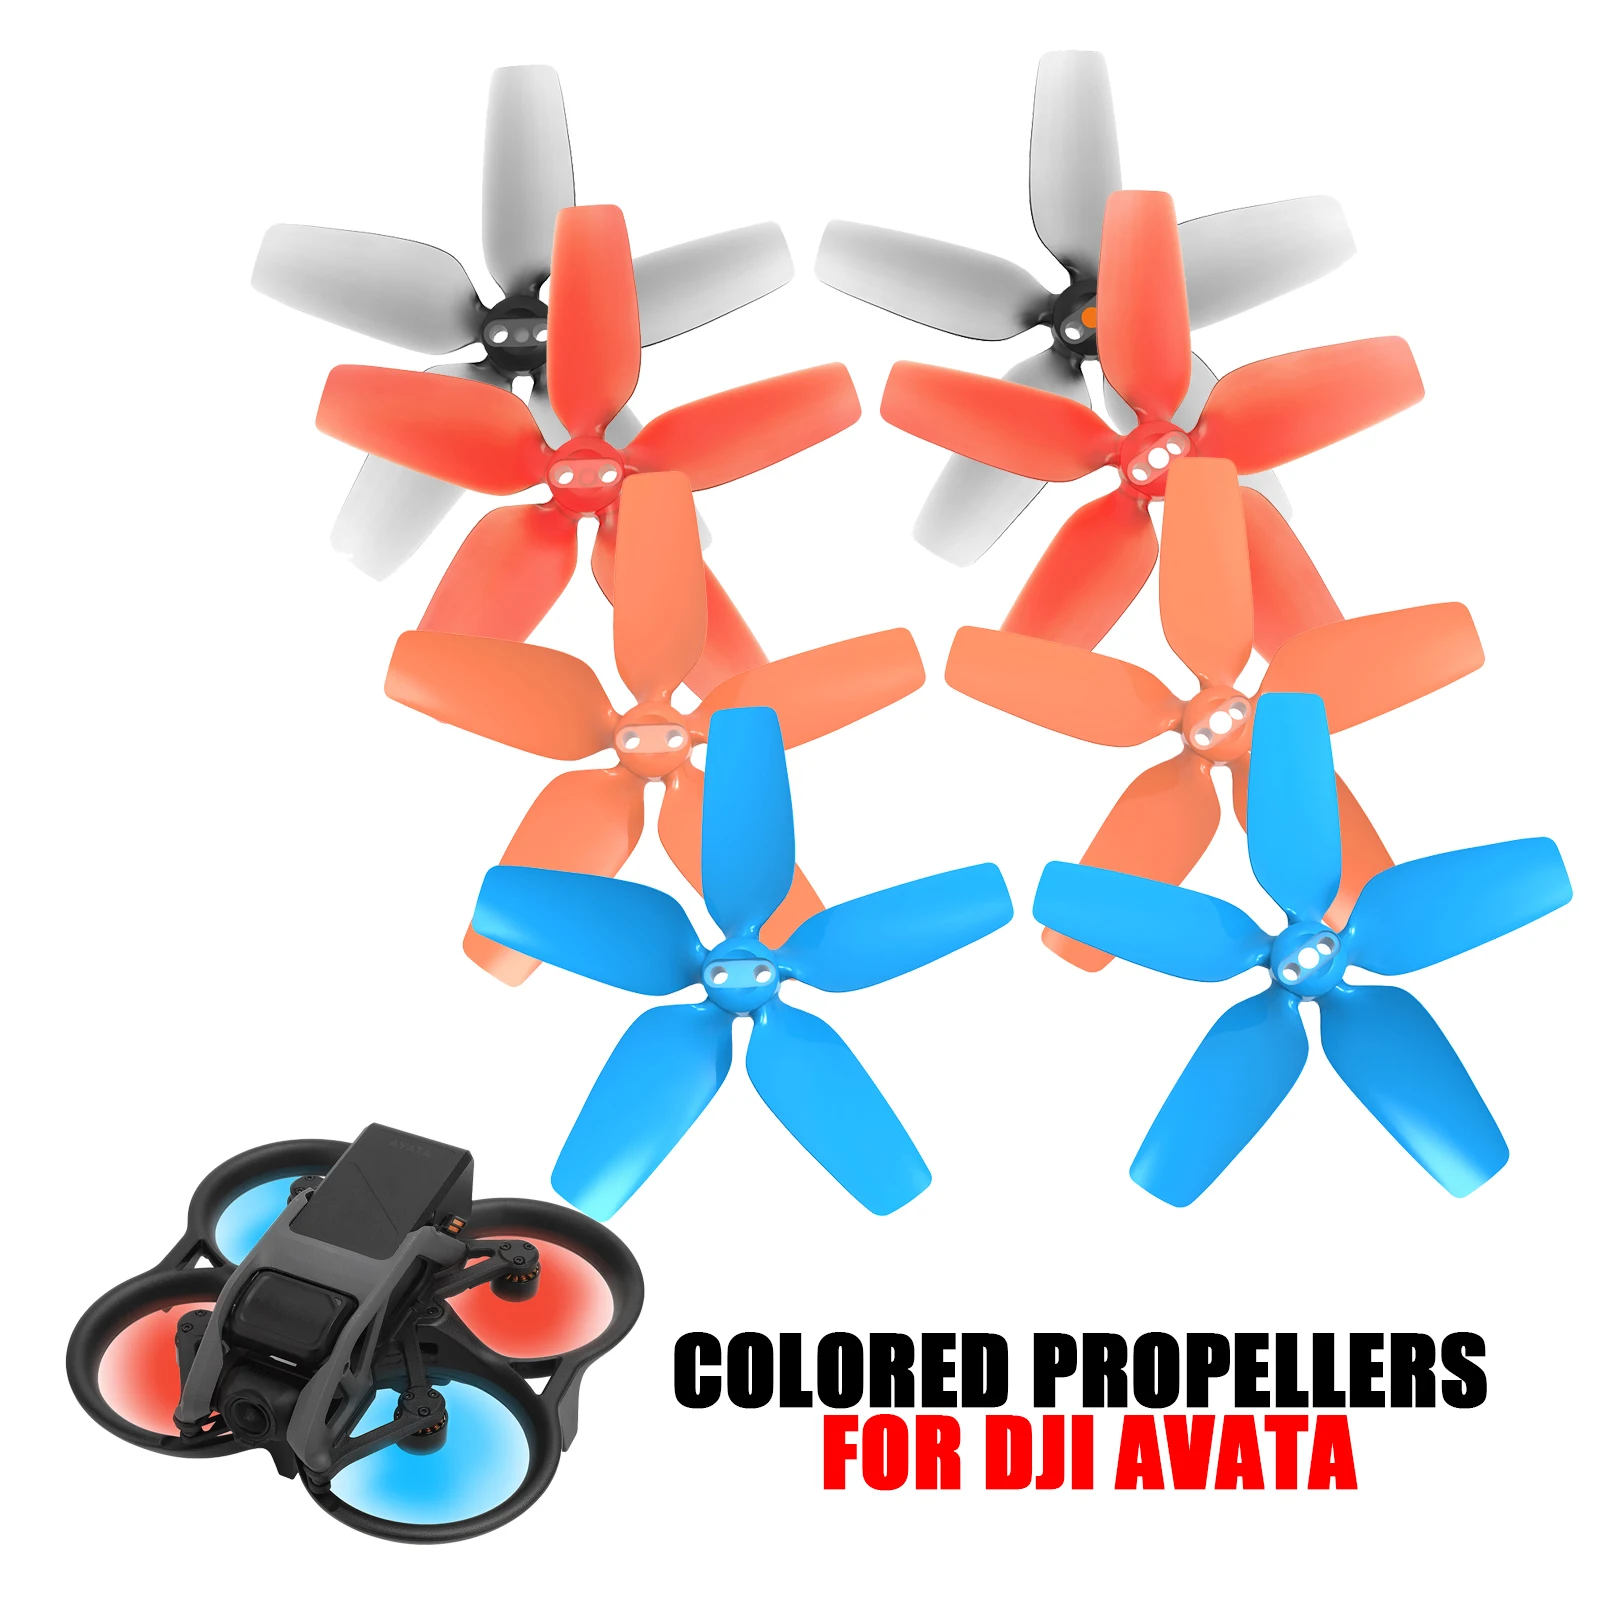 

Avata Propeller 2925s FPV Propellers Colored Quick-Release Blades Replacement Prop for DJI AVATA Drone Accessories